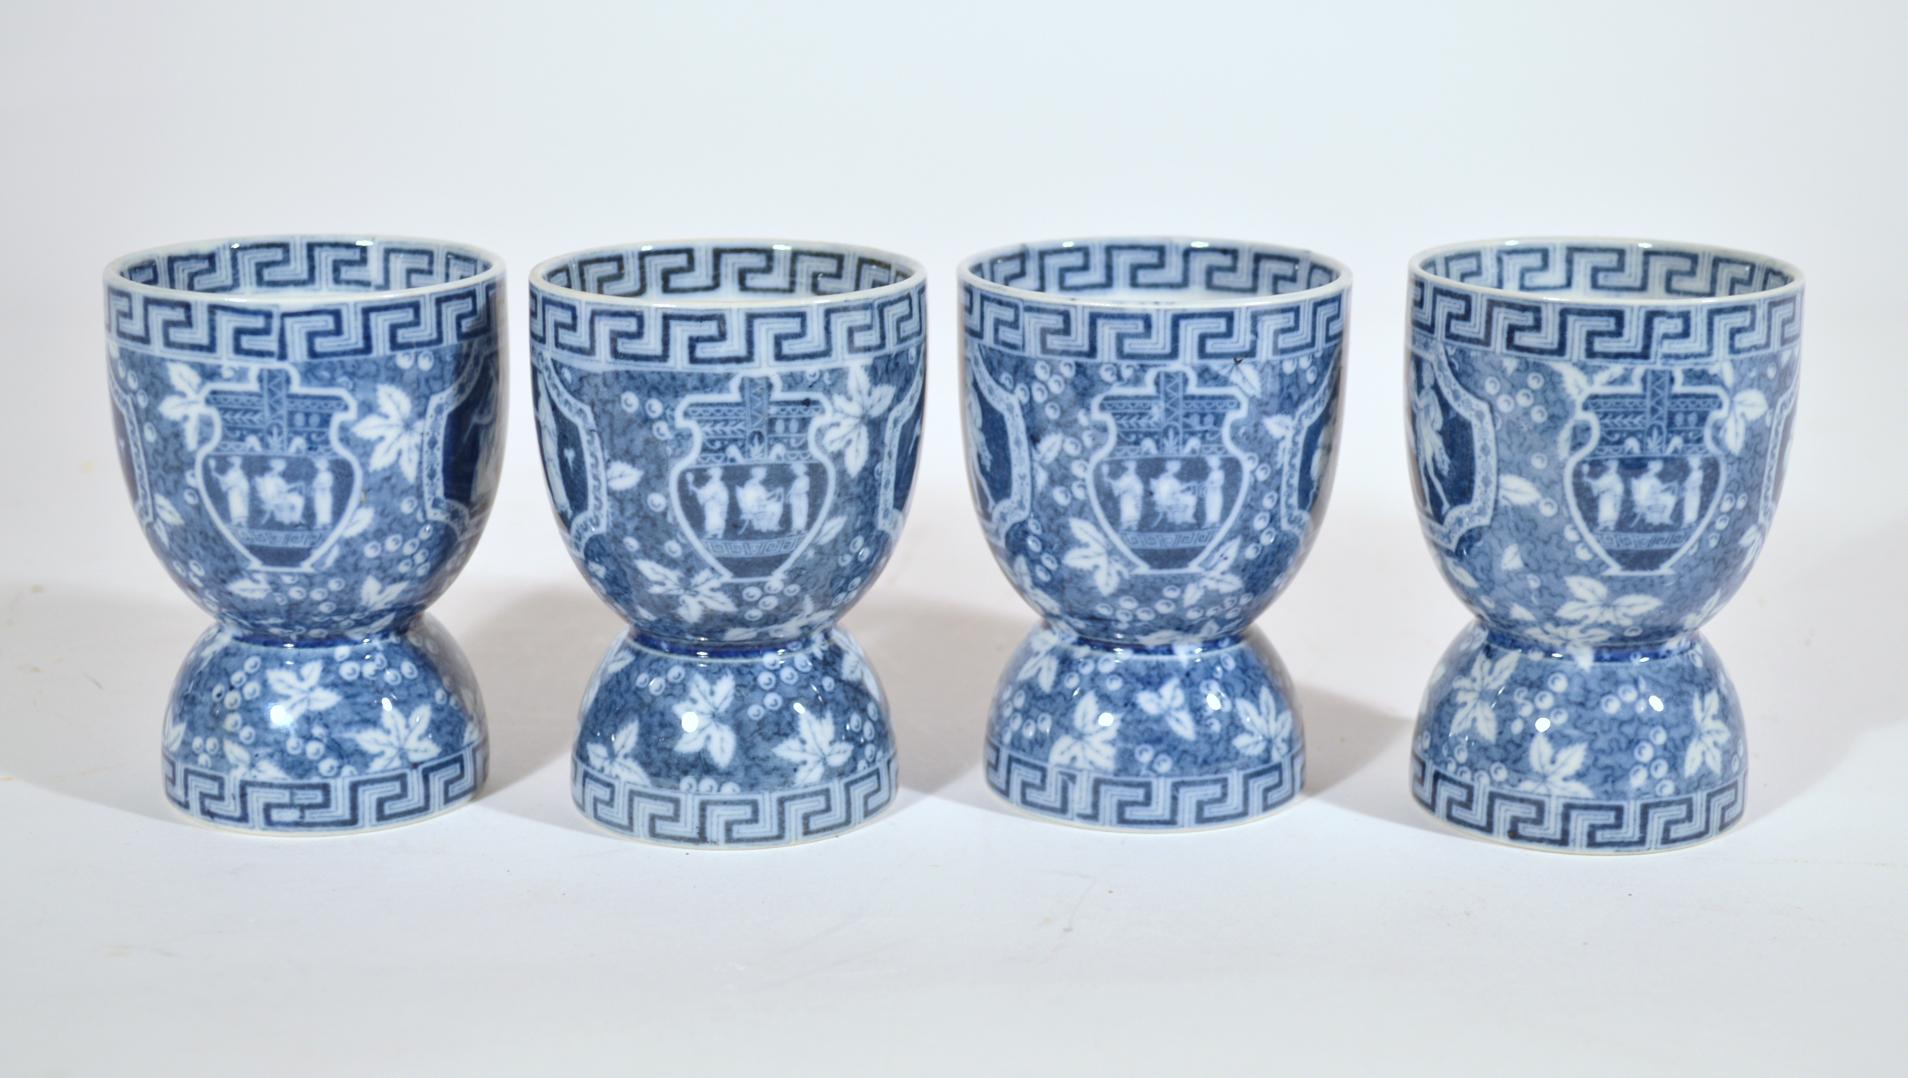 Spode pottery blue Greek pattern double egg cups
late 19th century

The double Spode egg cups have a Greek key design to top and bottom. To one side is a panel with three seated musicians and to the other side are three minstrels playing their